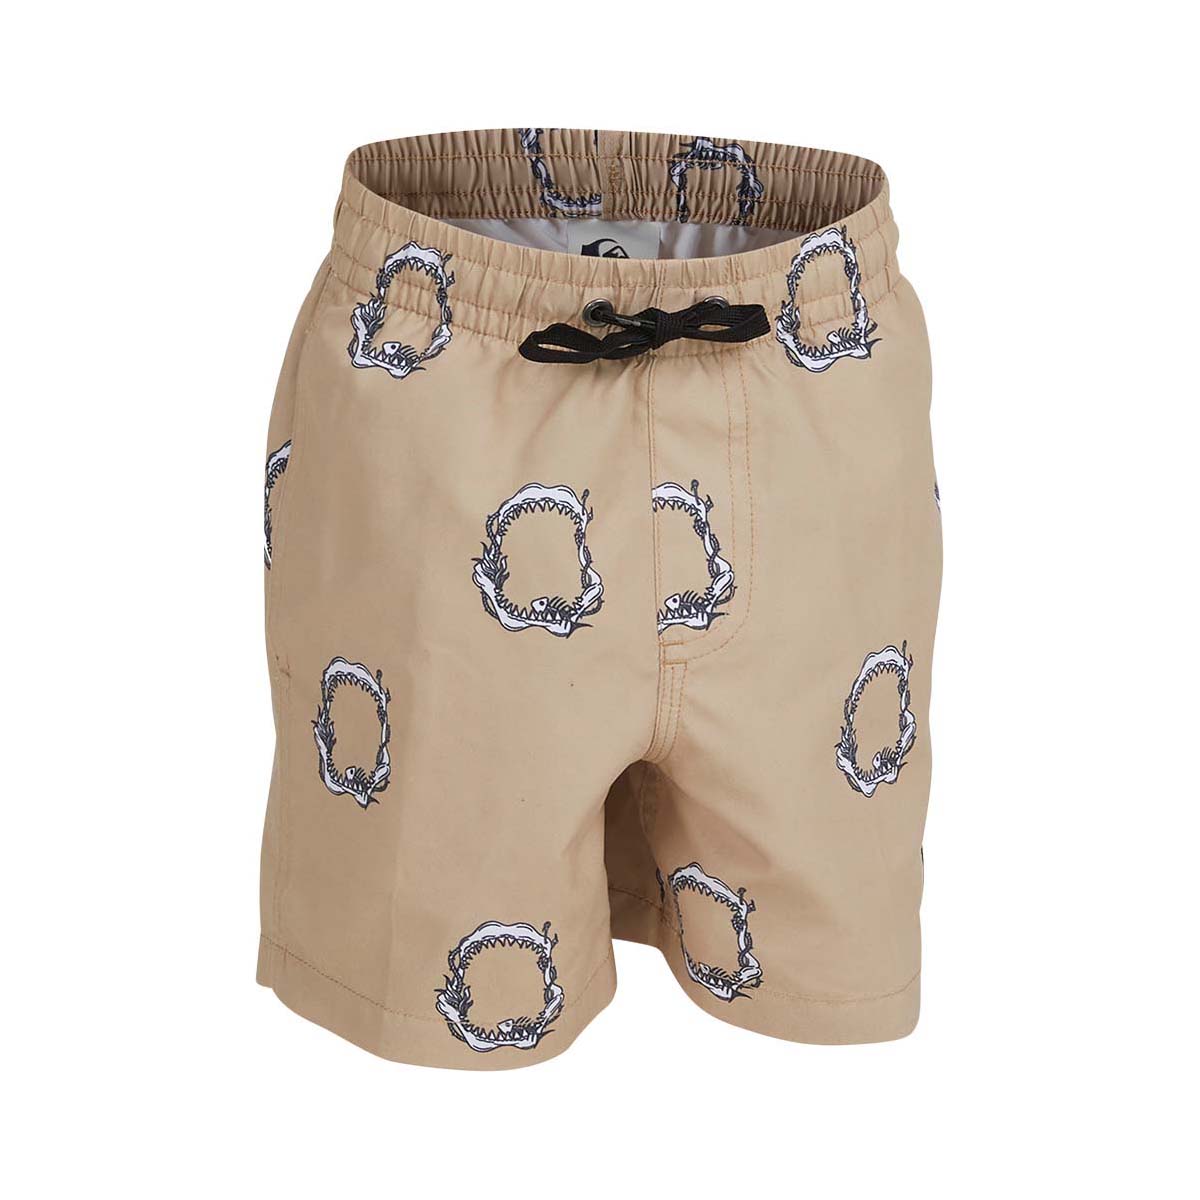 Quiksilver Kids' Tooth Pick Boardshorts Incense 6